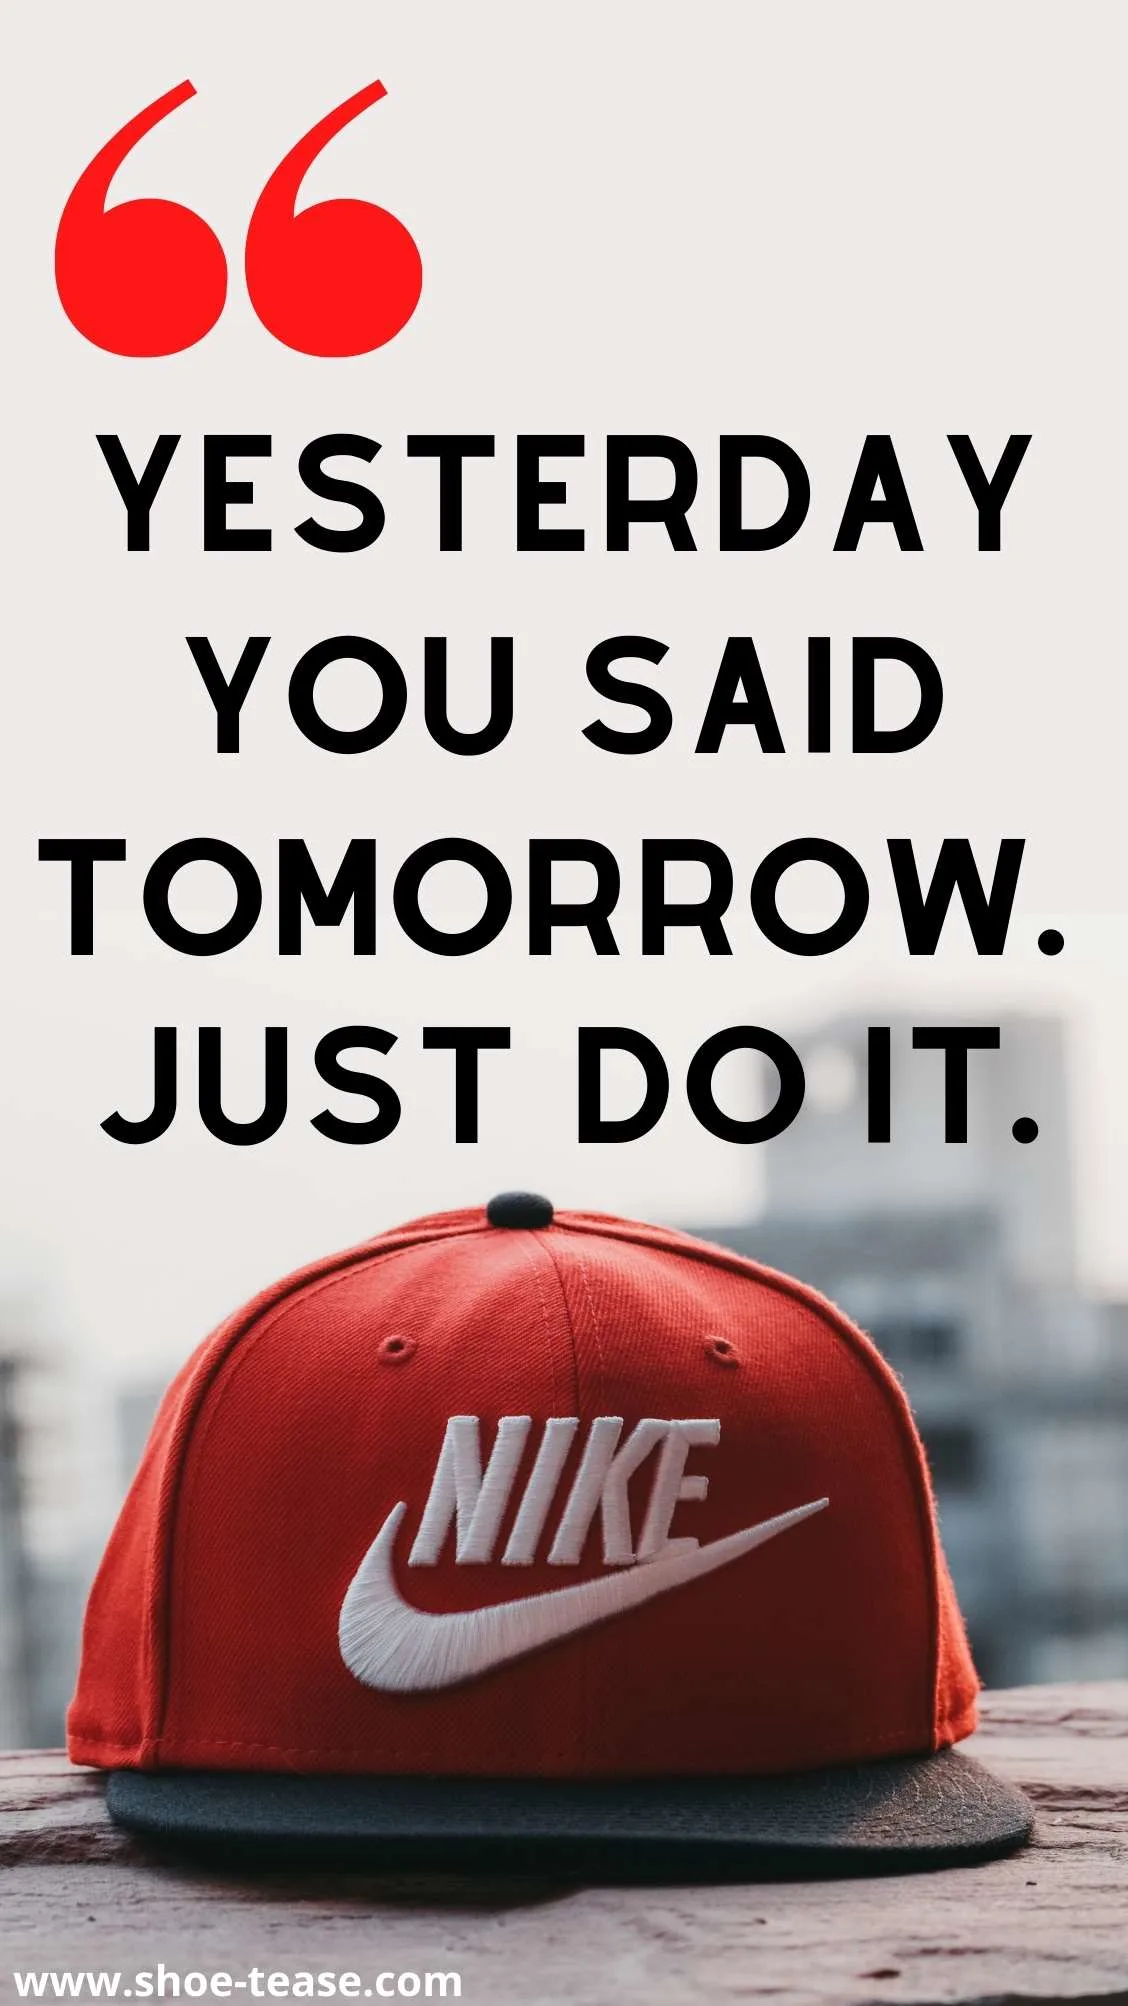 Over 100 Best Nike Quotes, Motivational Slogans and about Nike